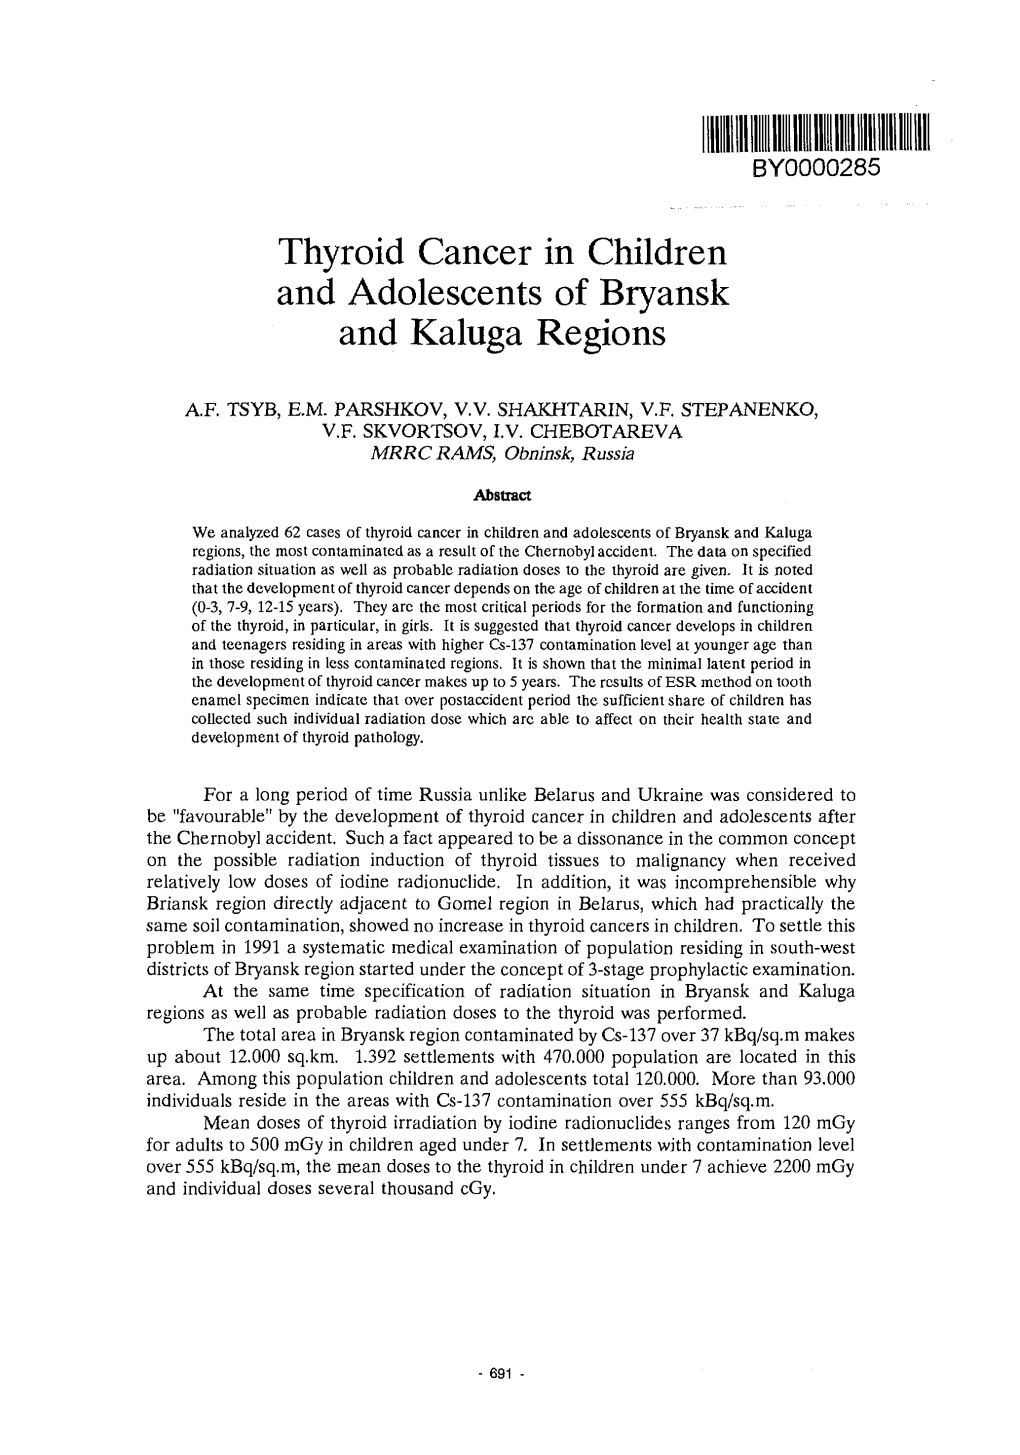 Thyroid Cancer in Children and Adolescents of Bryansk and Kaluga Regions